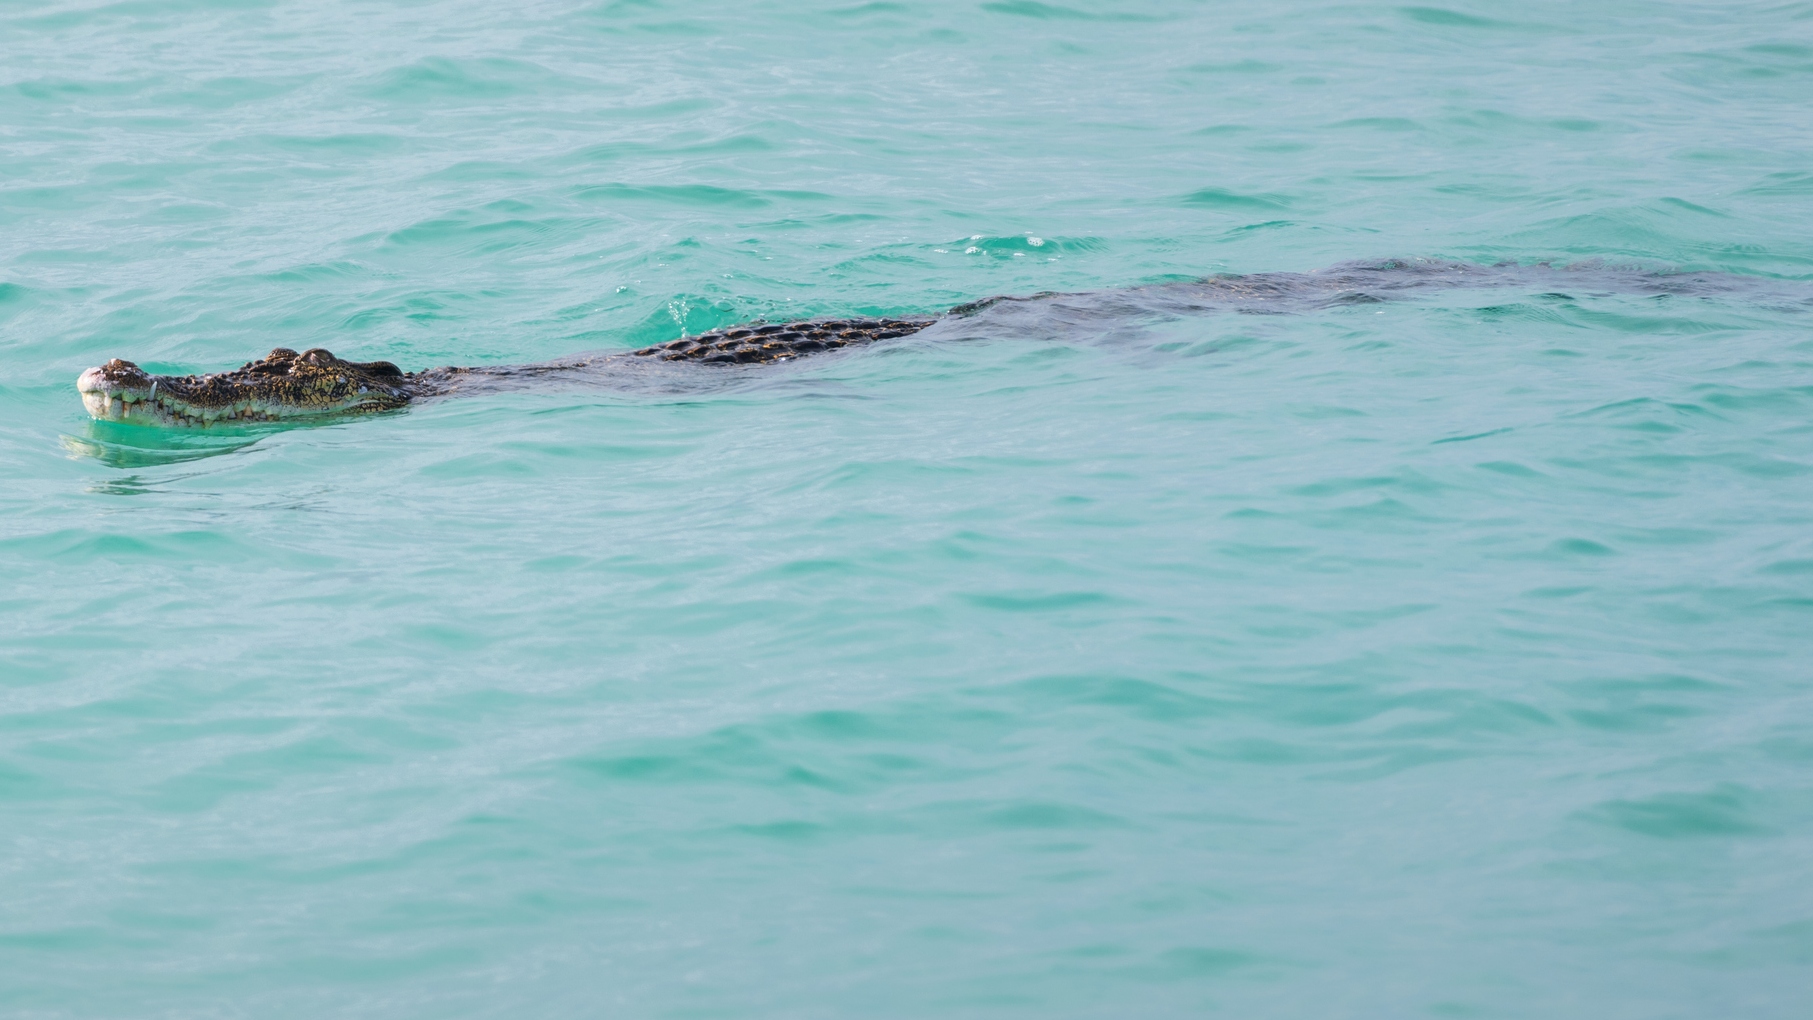 alligator swimming in the water at the beach